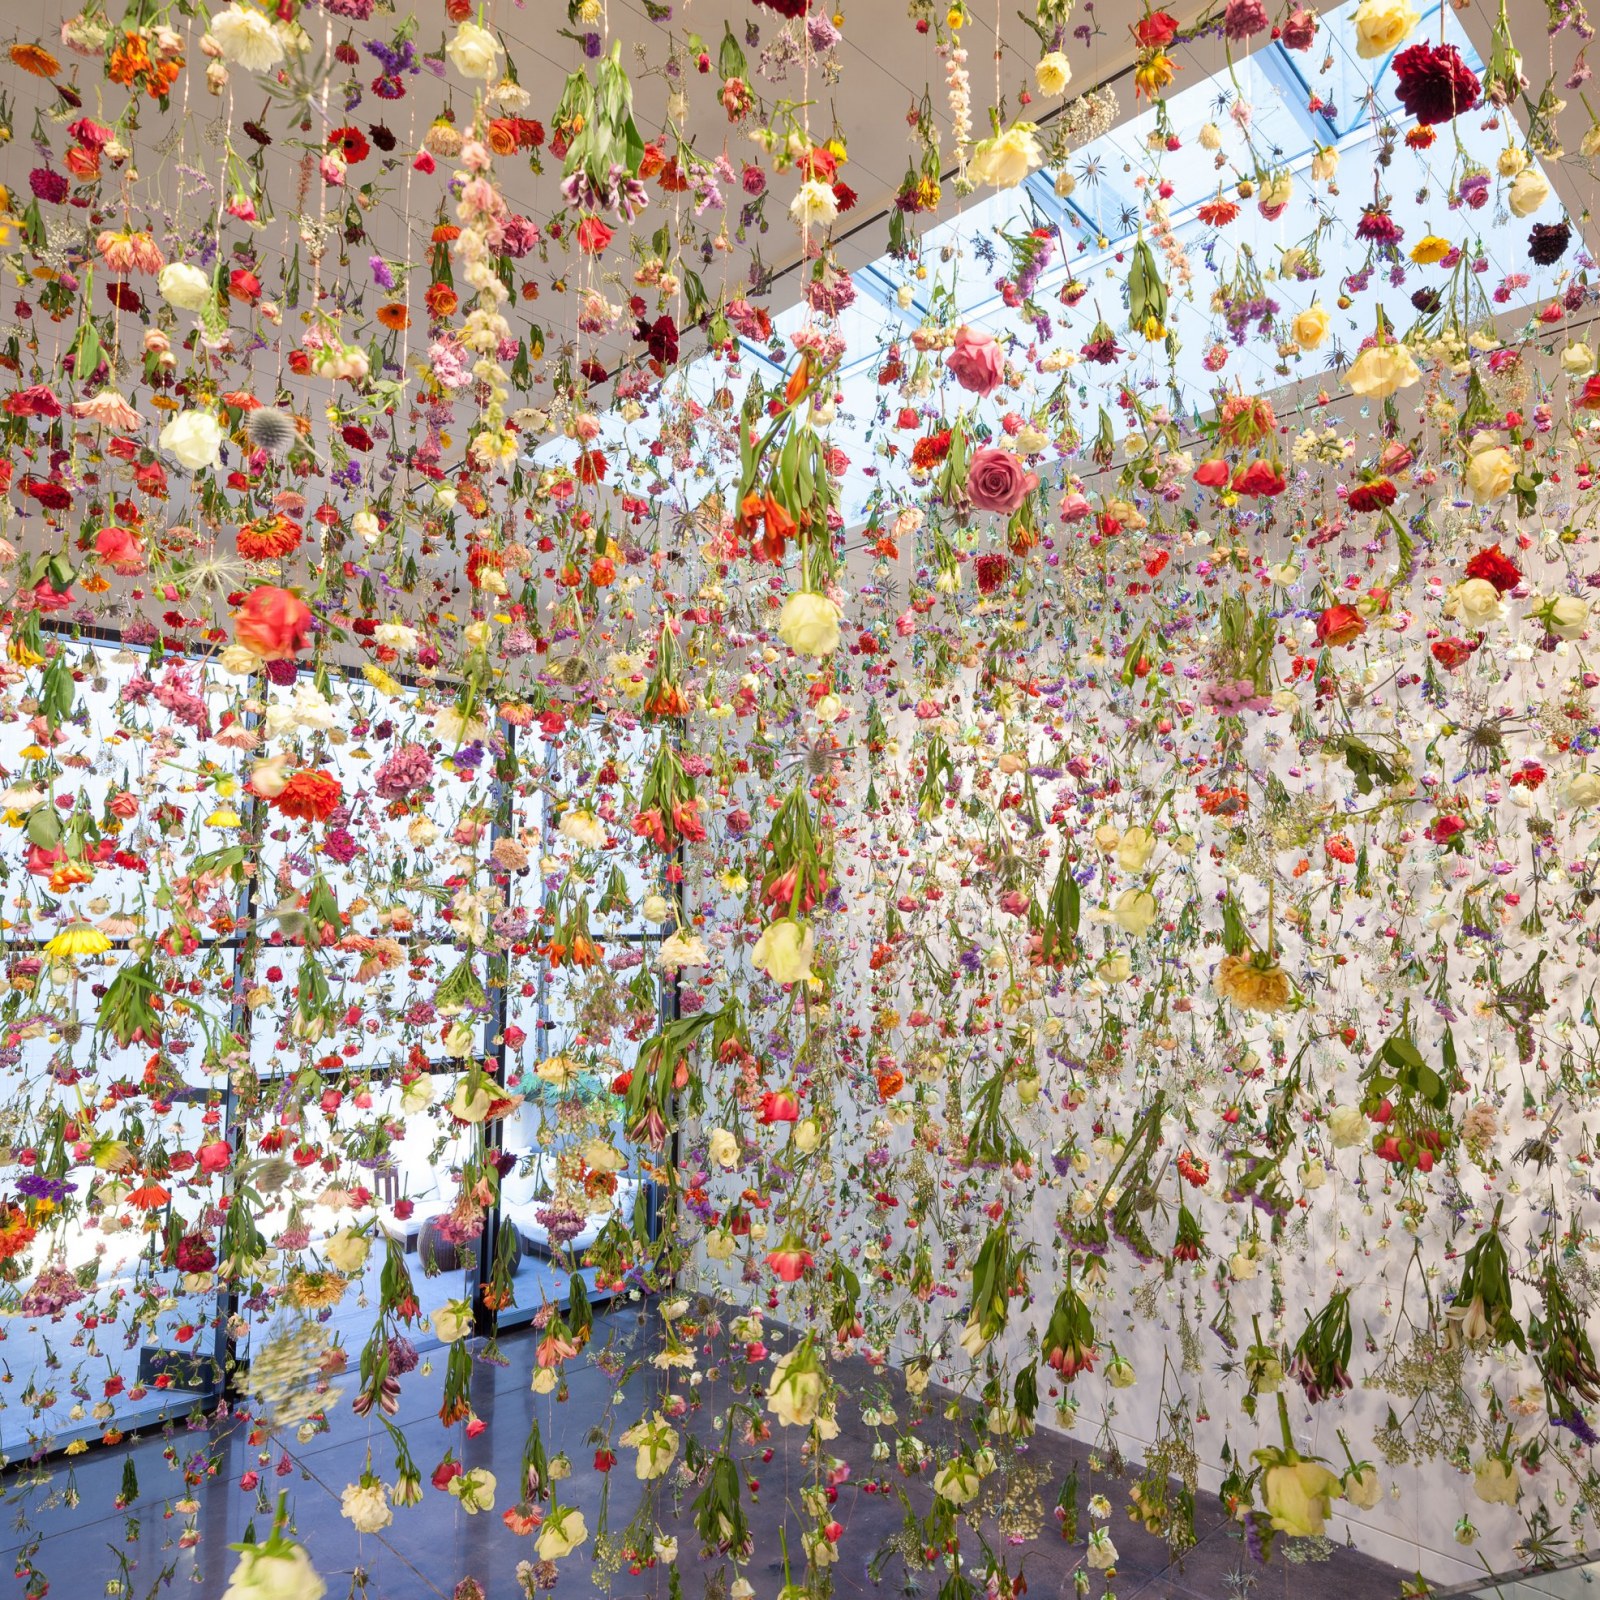 This Artist's Hanging Gardens Find Beauty In Decay